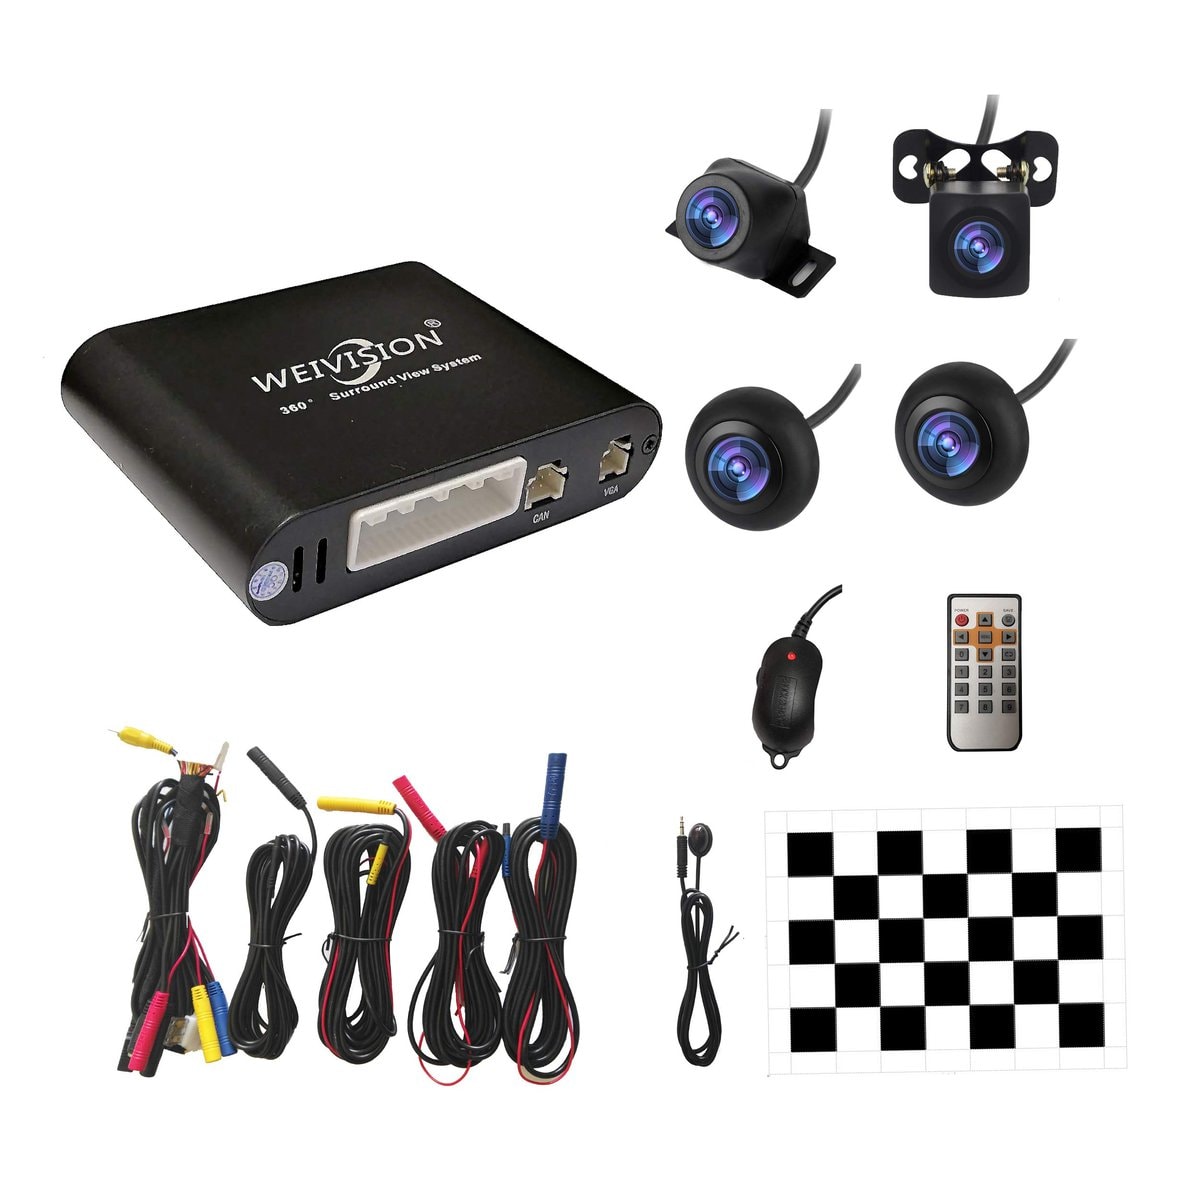 Weivision 360 Bird View Car DVR System